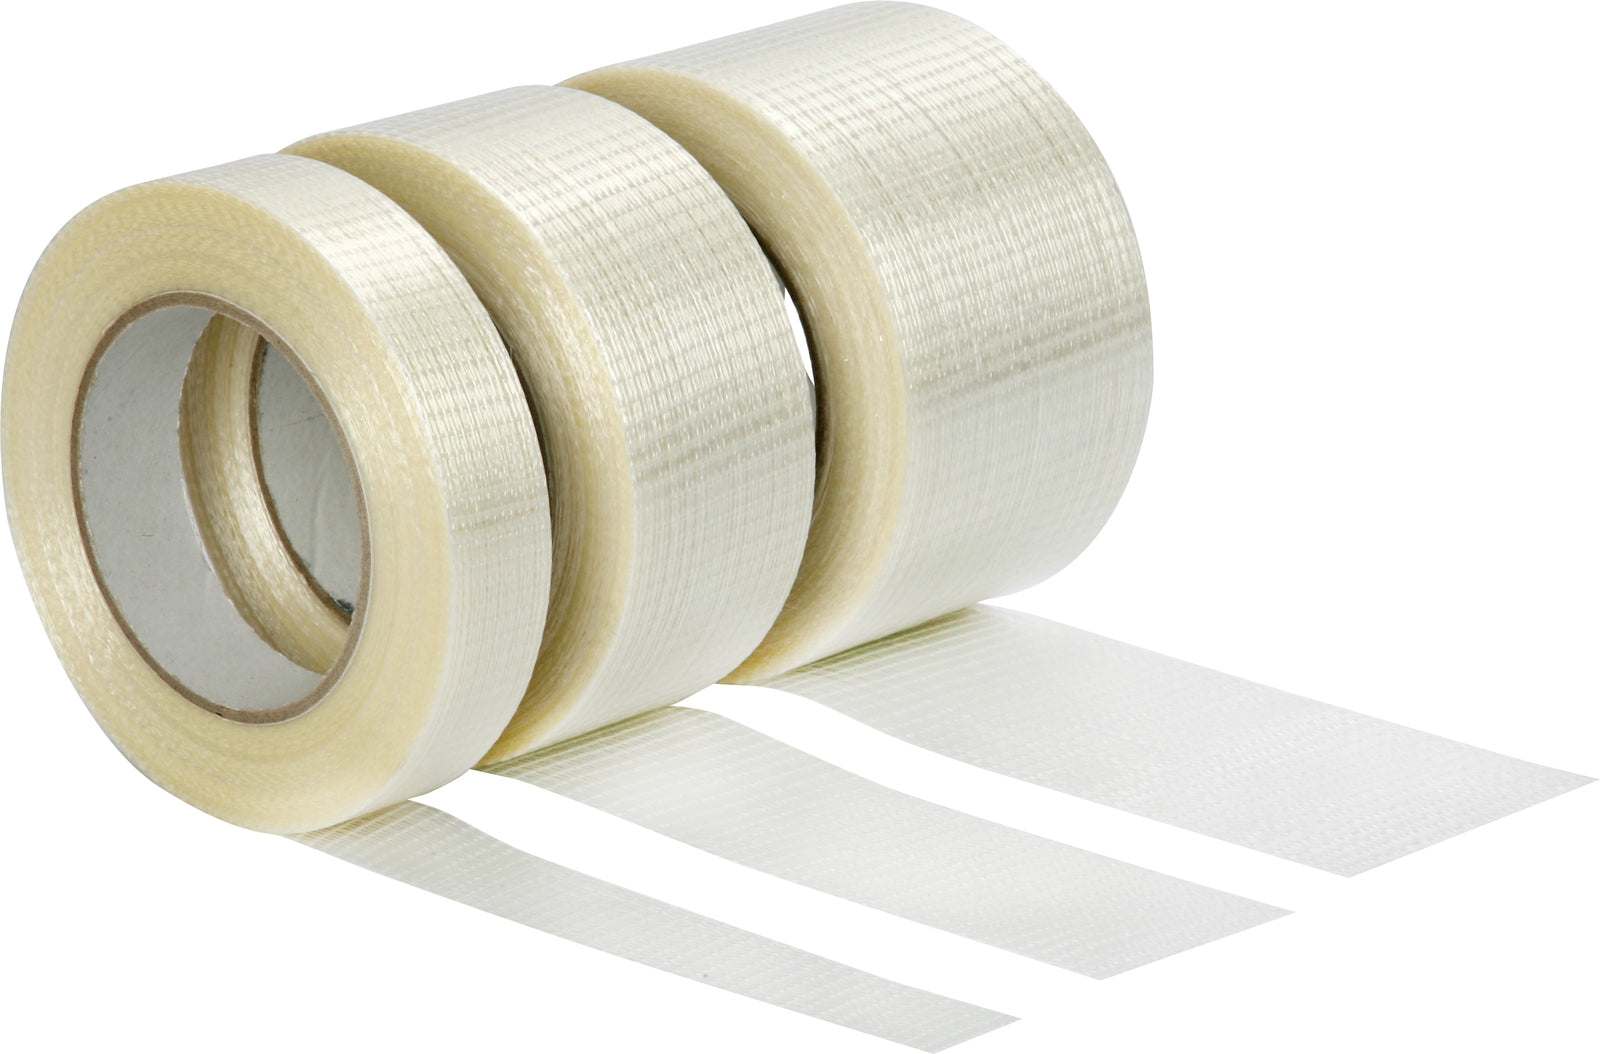 50M Super Strong Clear Filament Duct Tape Heavy Duty Waterproof